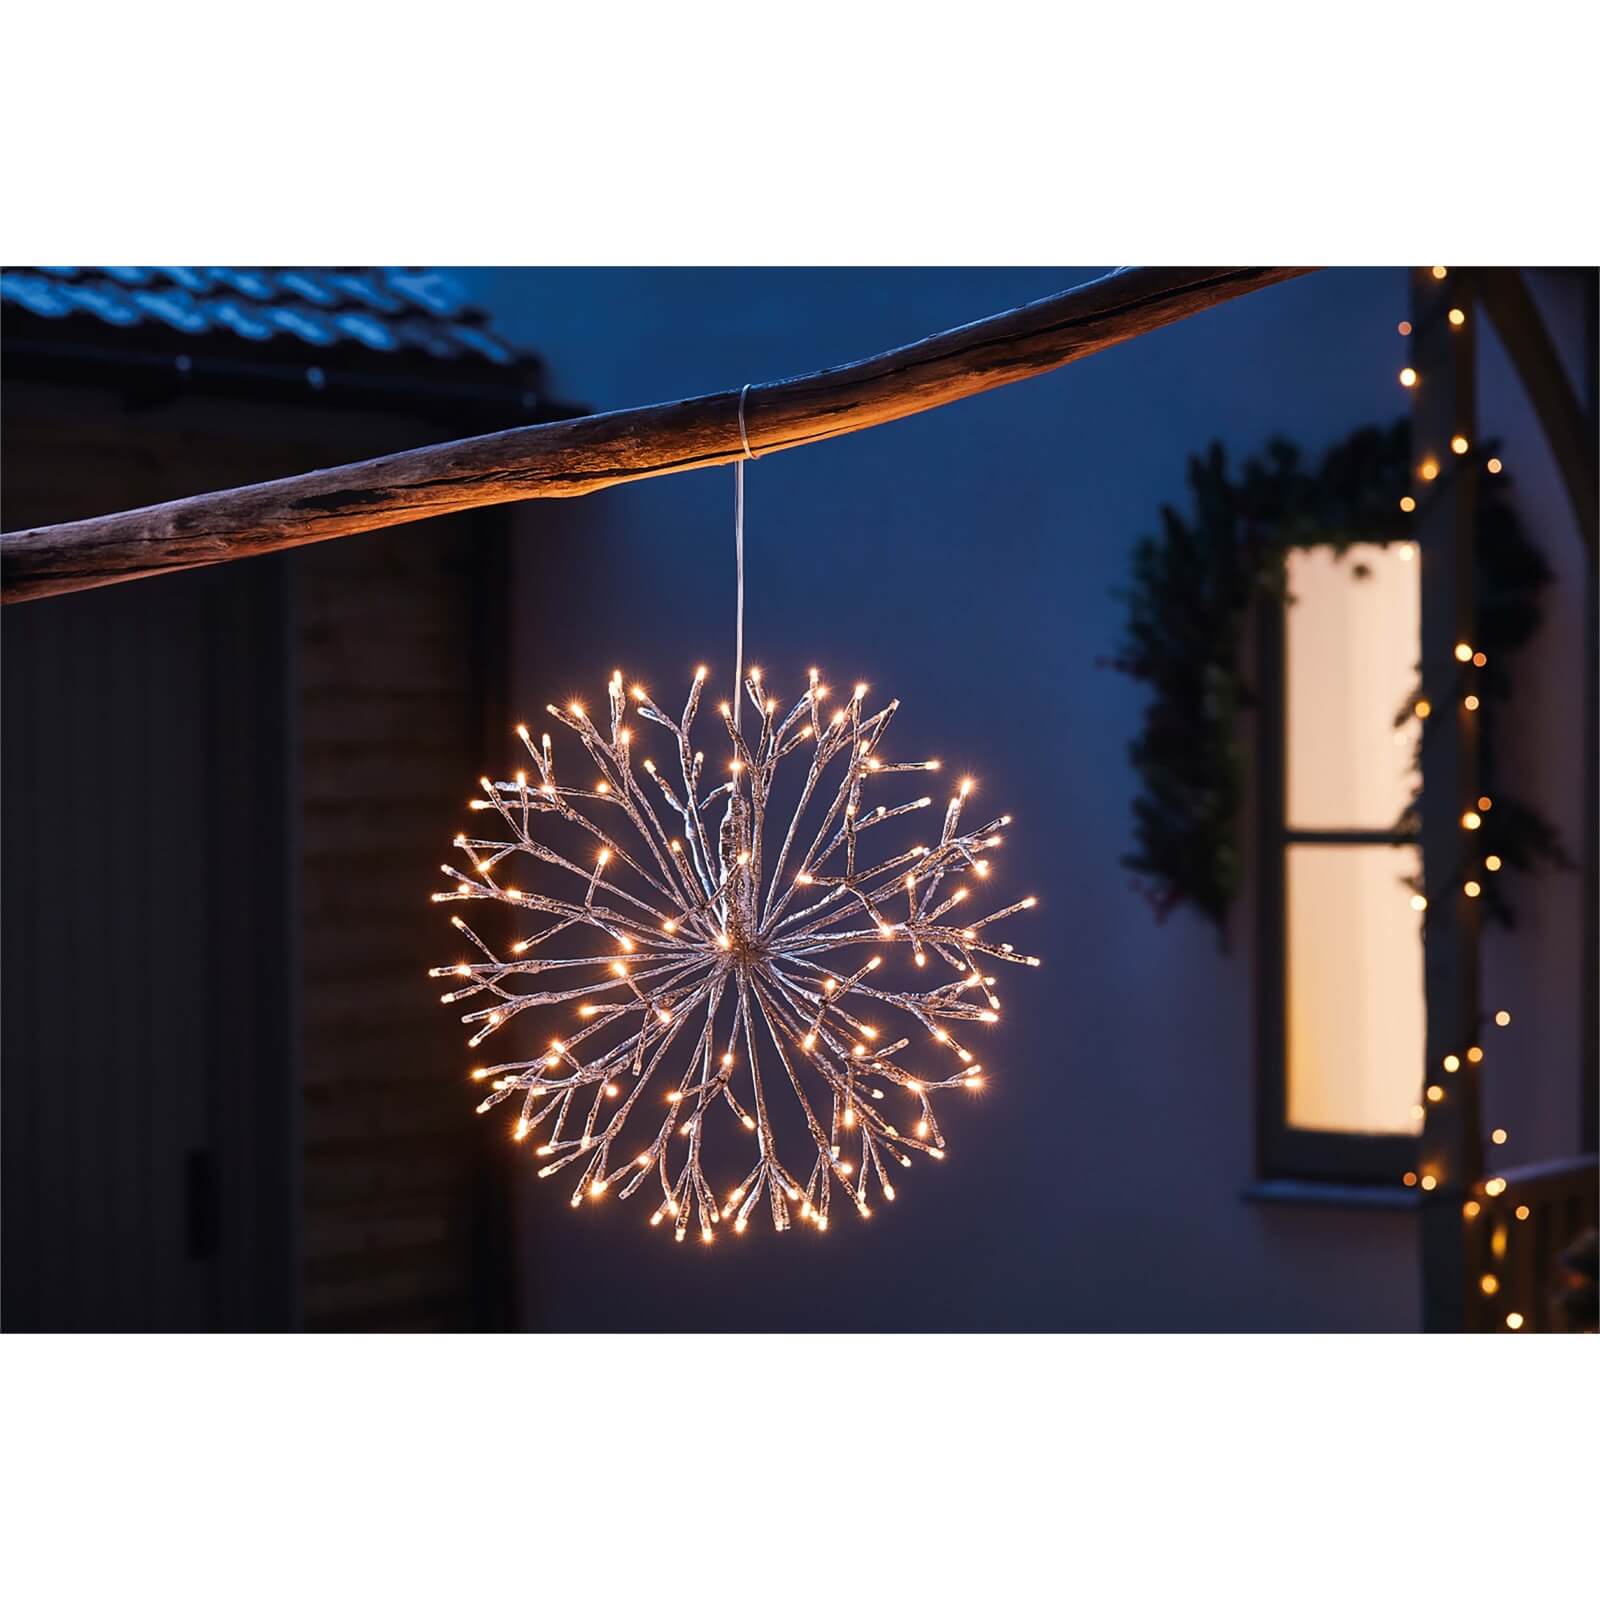 Photo of Silver North Star Led Christmas Light Decoration - Small